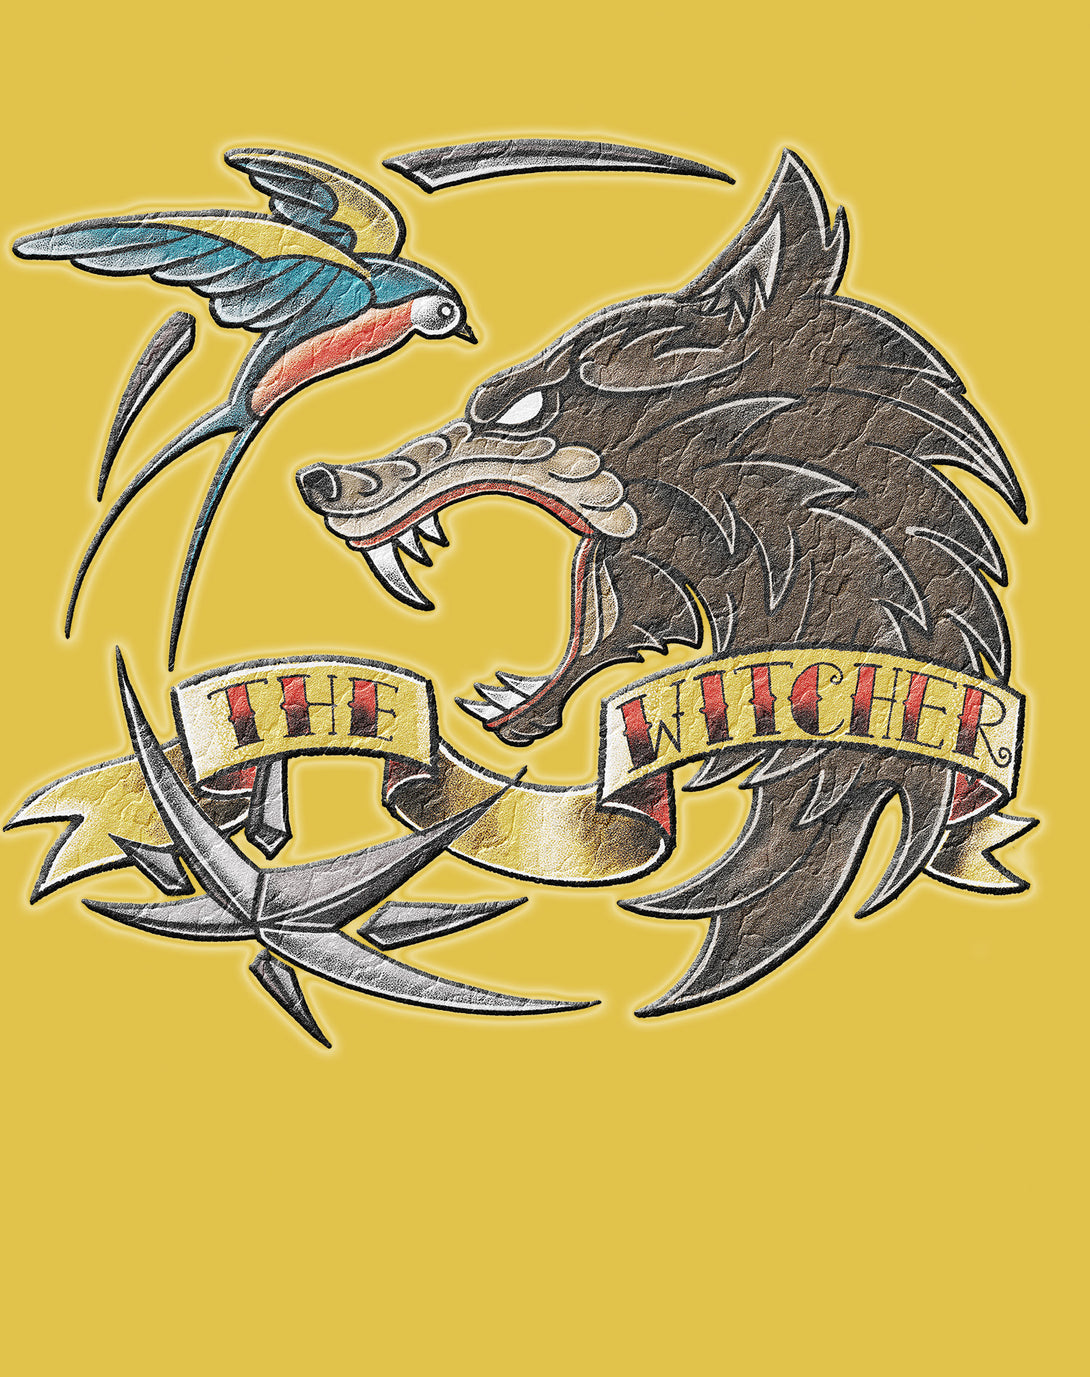 The Witcher Logo Tattoo Wolf Official Men's T-Shirt Yellow - Urban Species Design Close Up